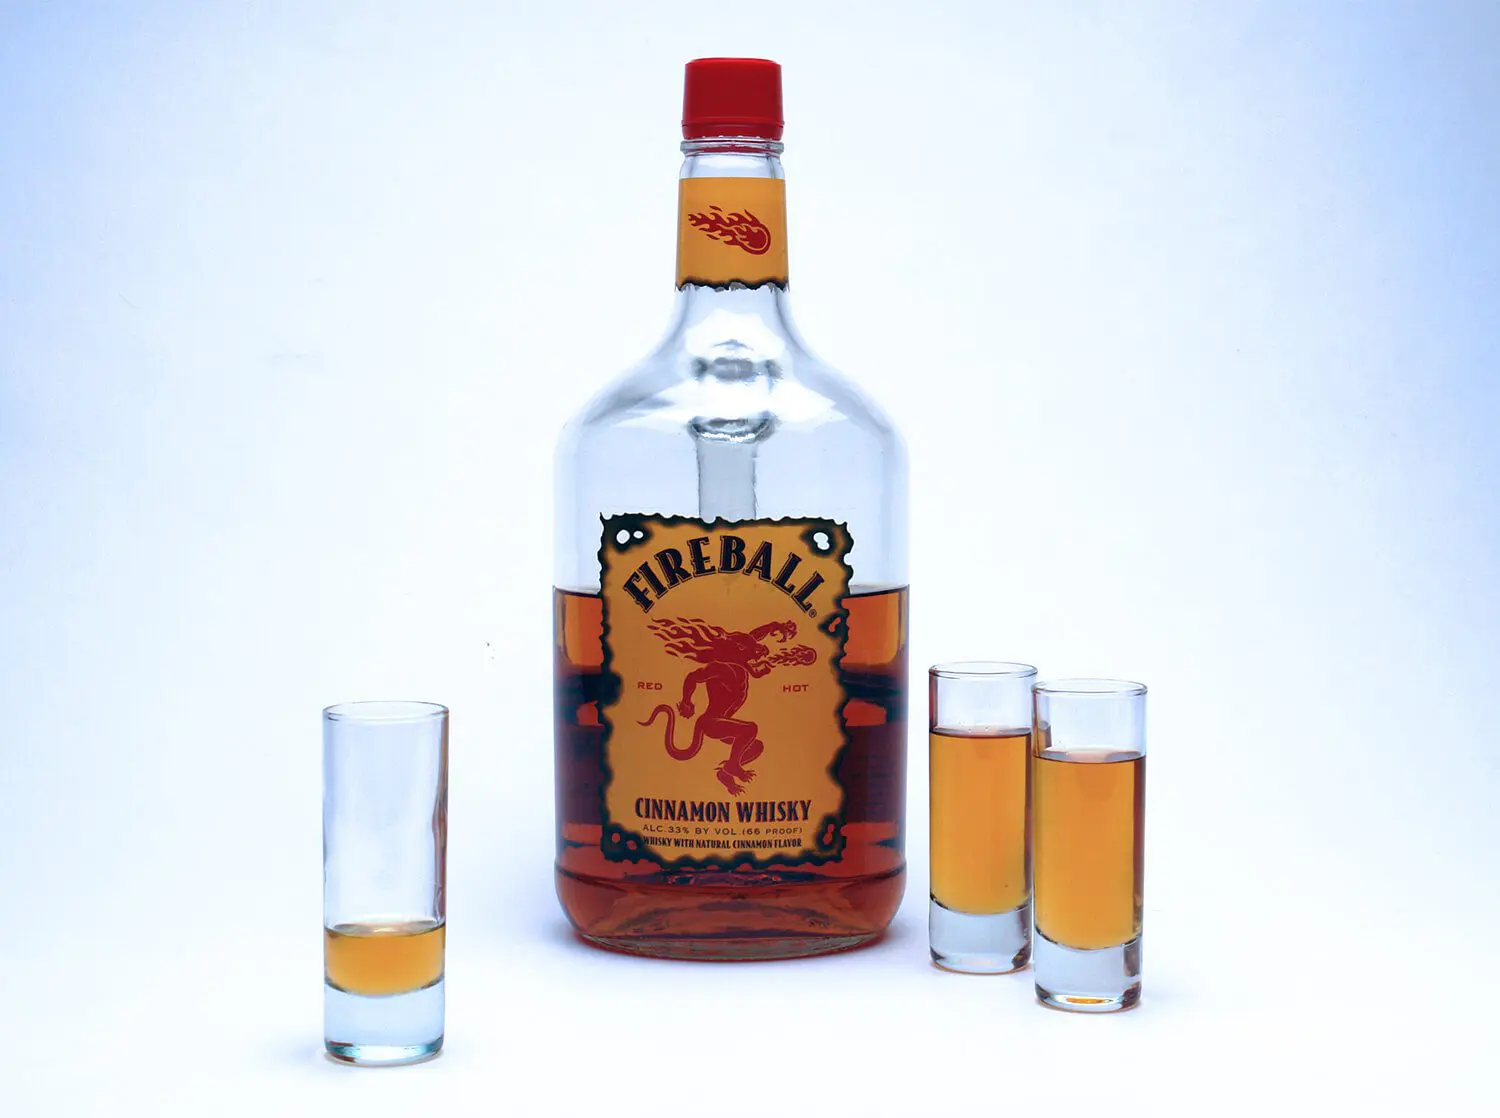 Facts about Fireball Whisky